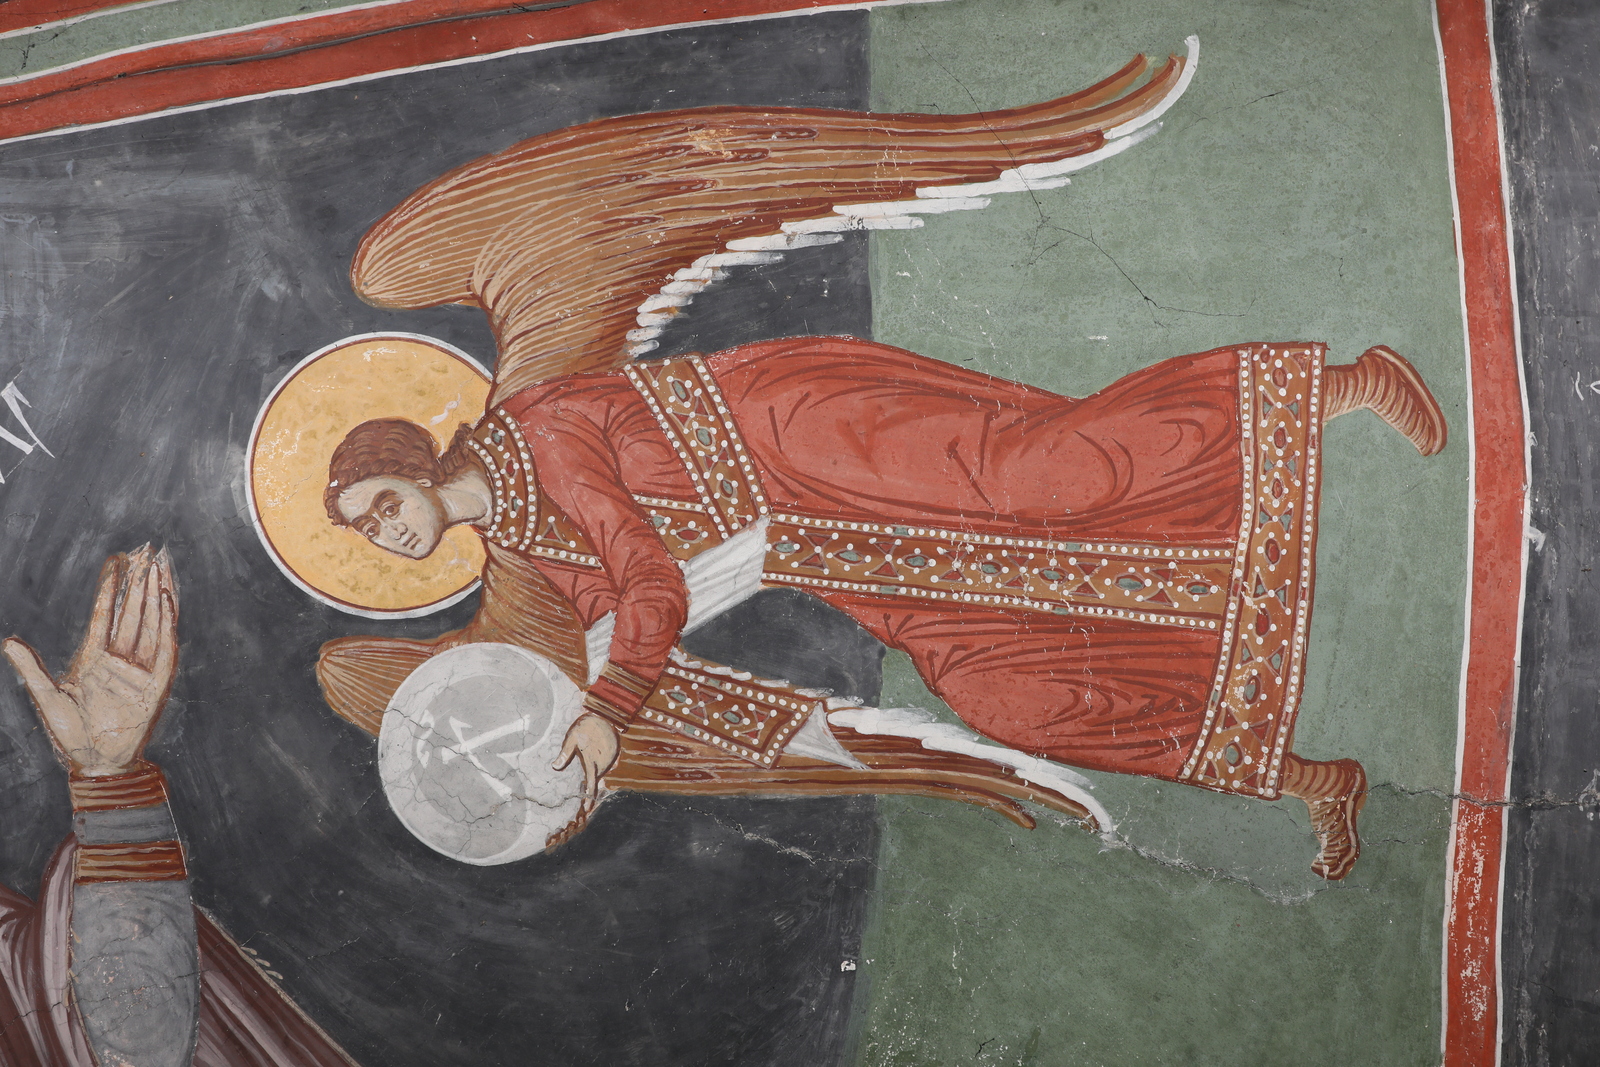 Archangel with an Orb